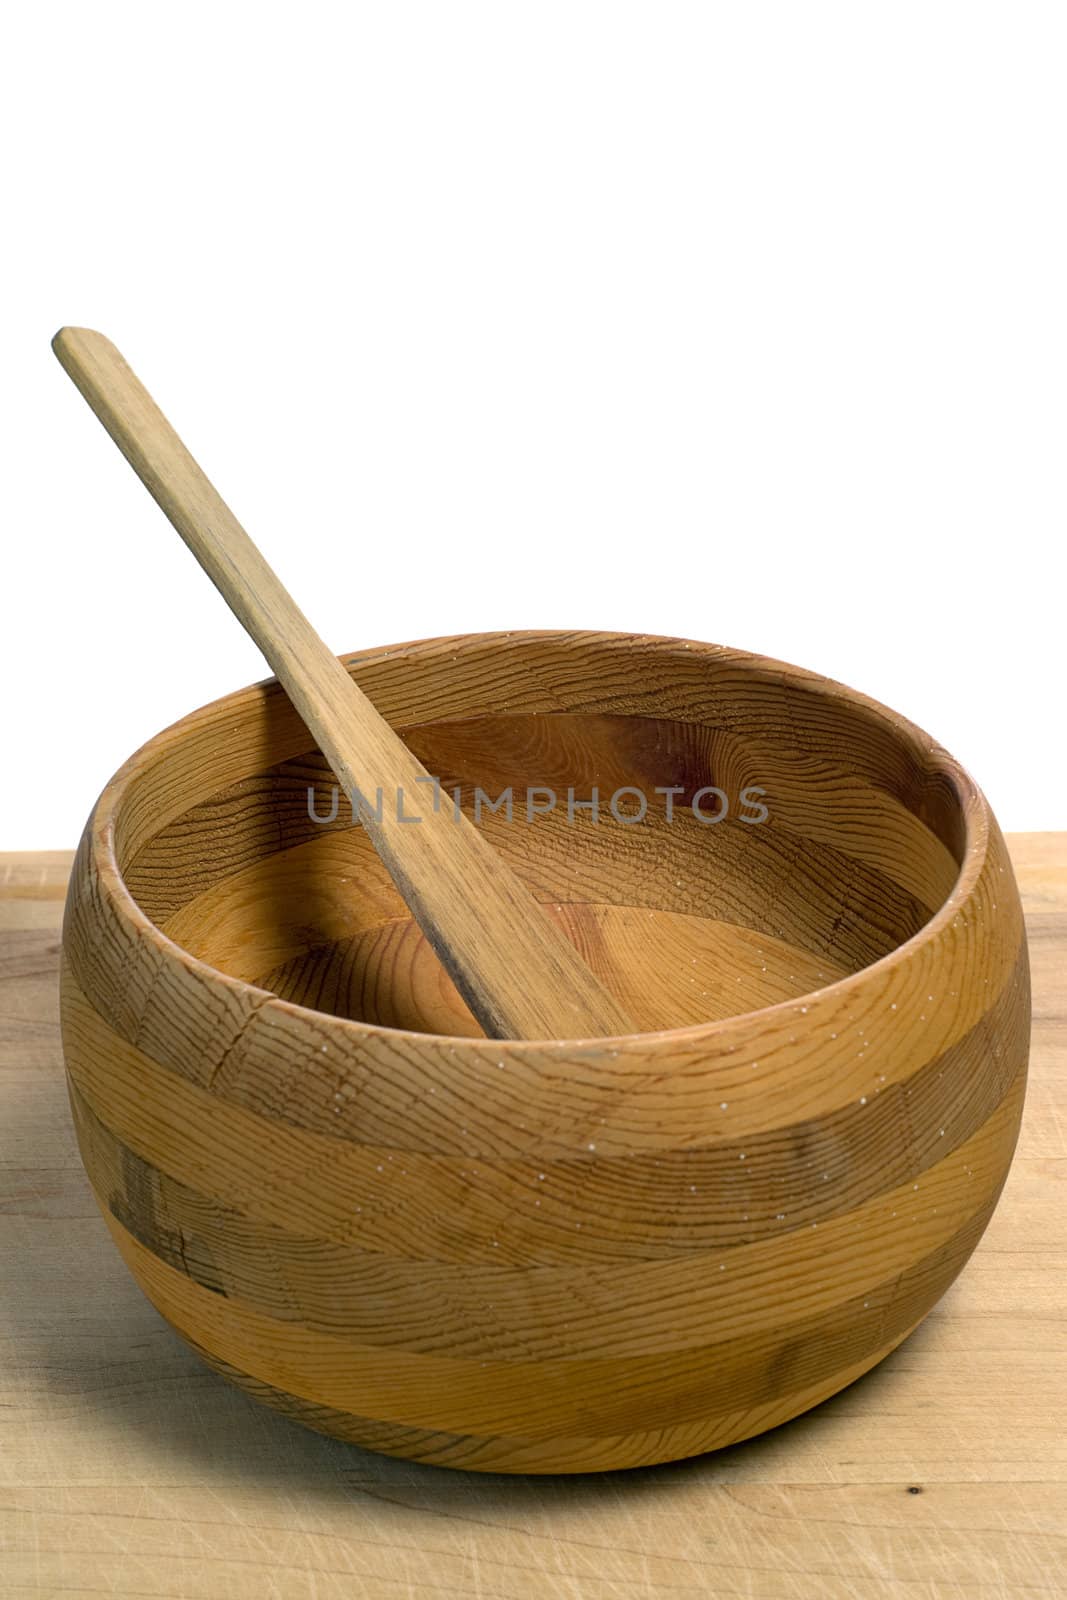 A small wooden bowl with a spatula in it, isolated against a white background